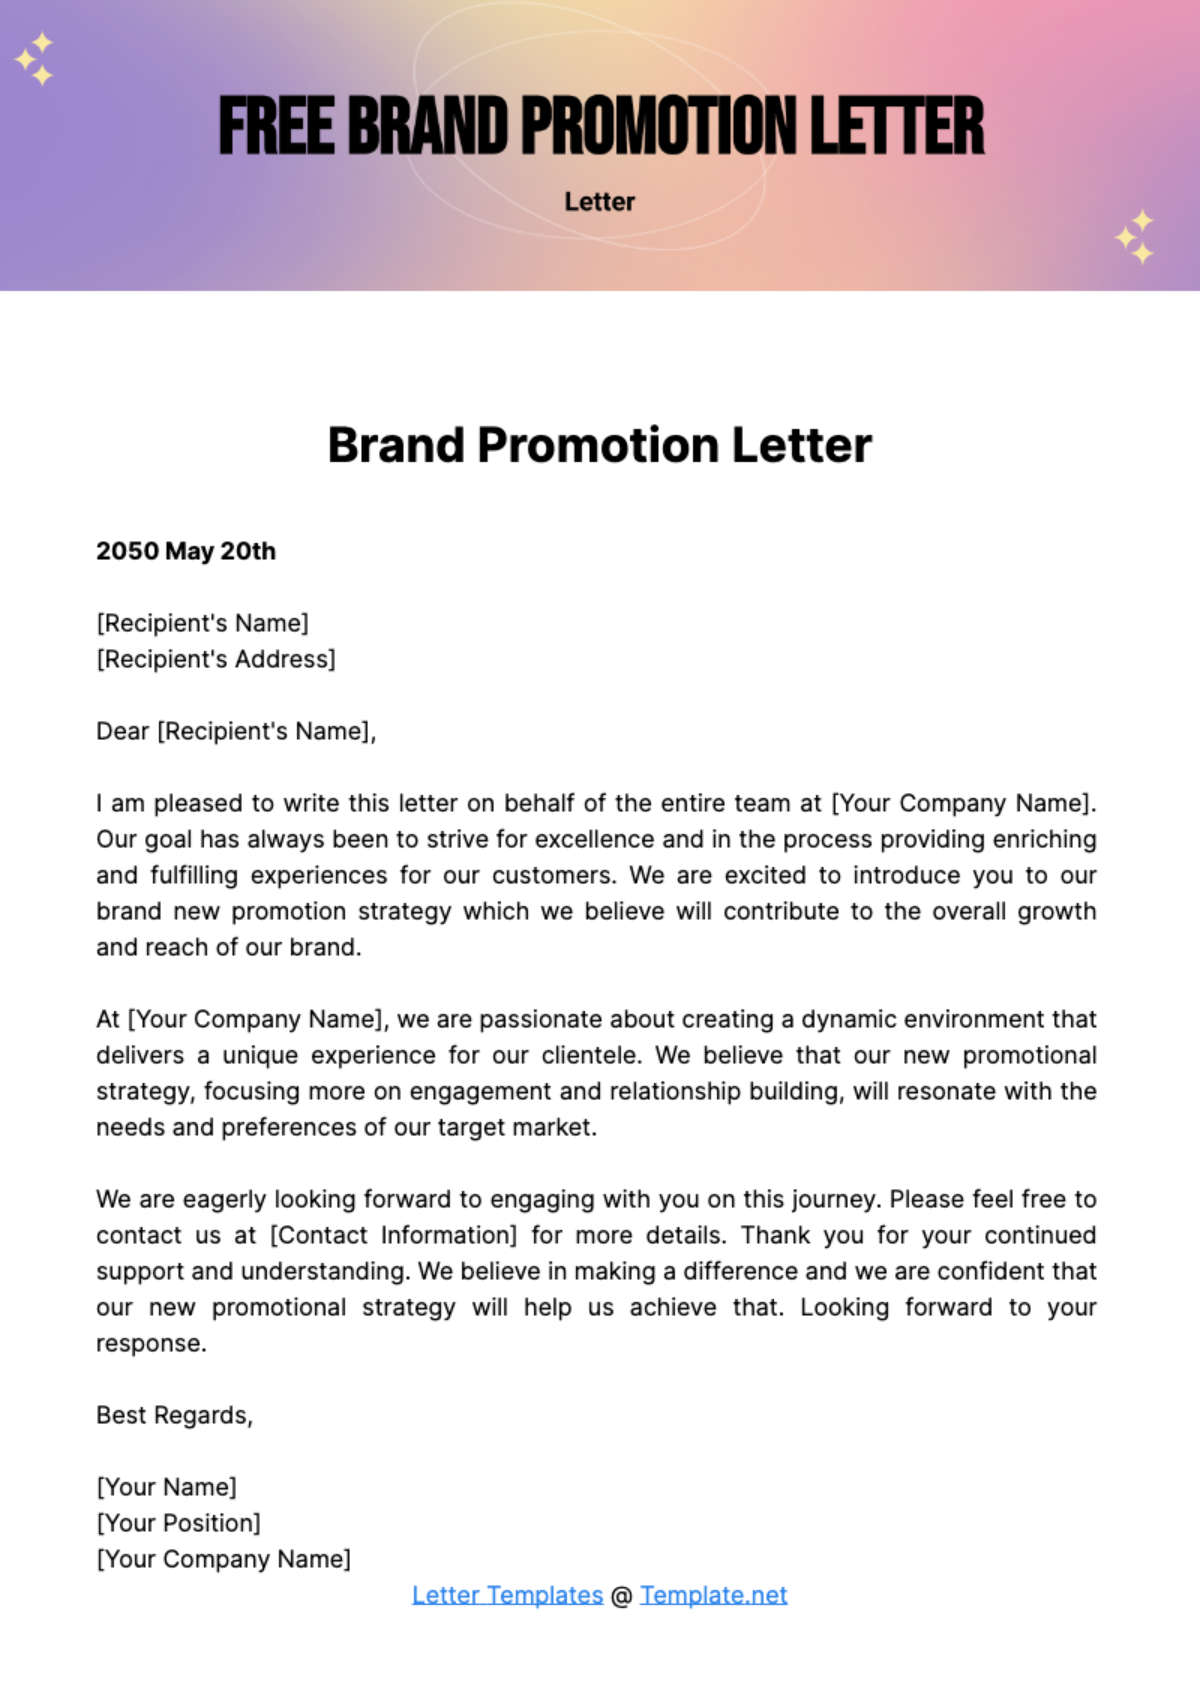 Free Brand Promotion Letter Template